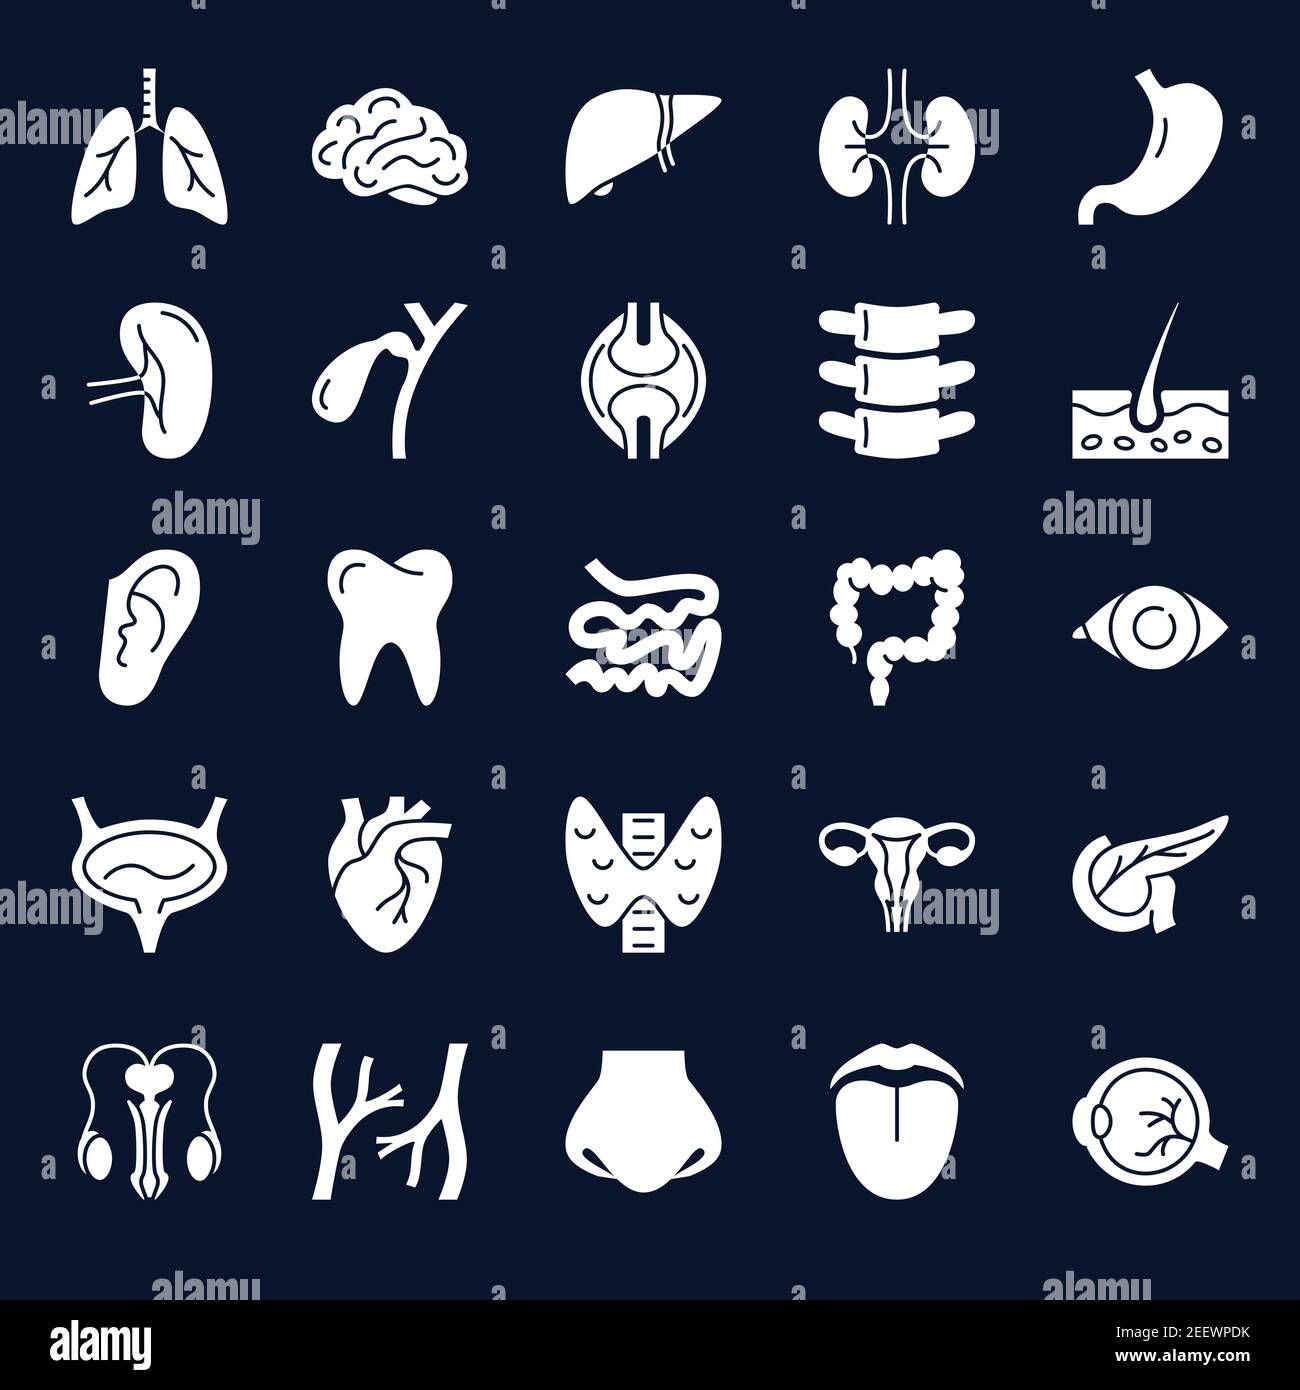 Anatomy icons collection with human internal organs symbols. Medical set in glyph style. Vector illustration. Stock Vector